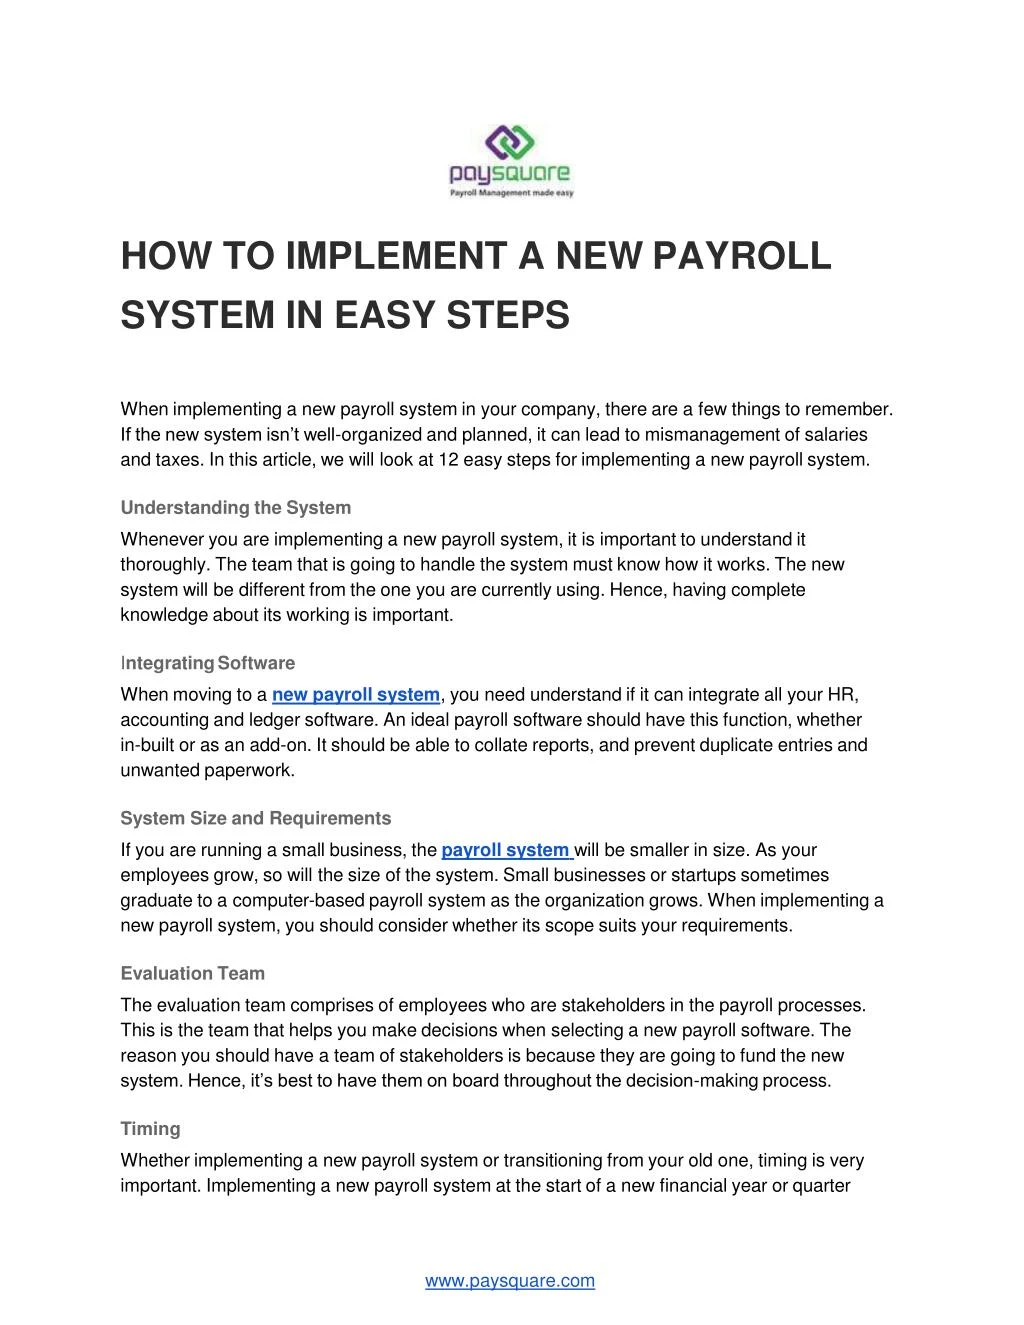 how to implement a new payroll system in easy steps